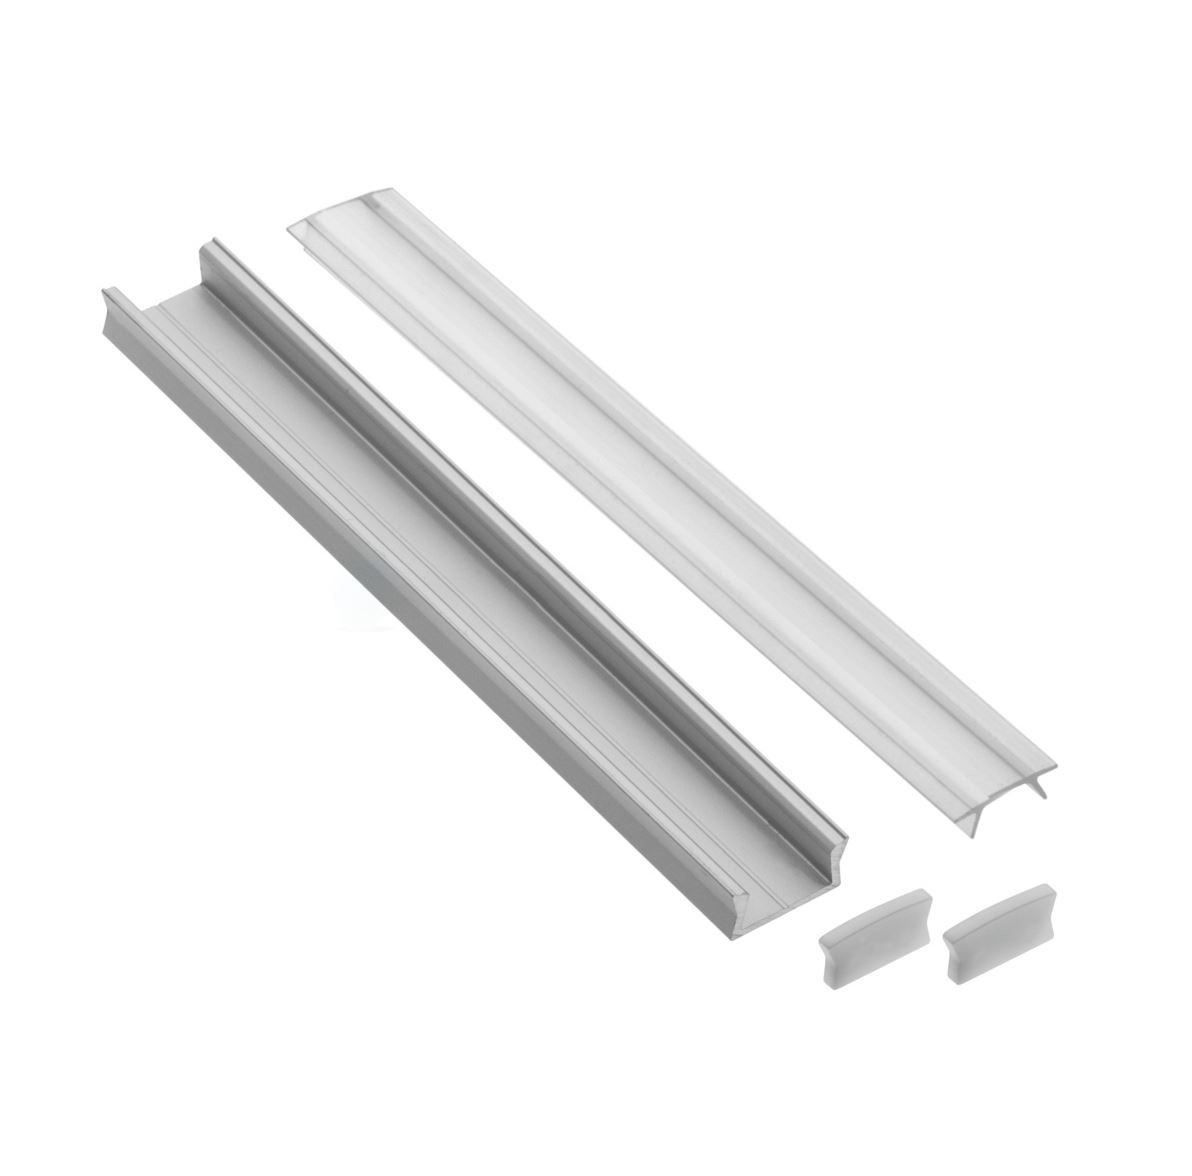 China Extrusion U Channel Strip LED Aluminium Profile 14mm With Light End Caps factory